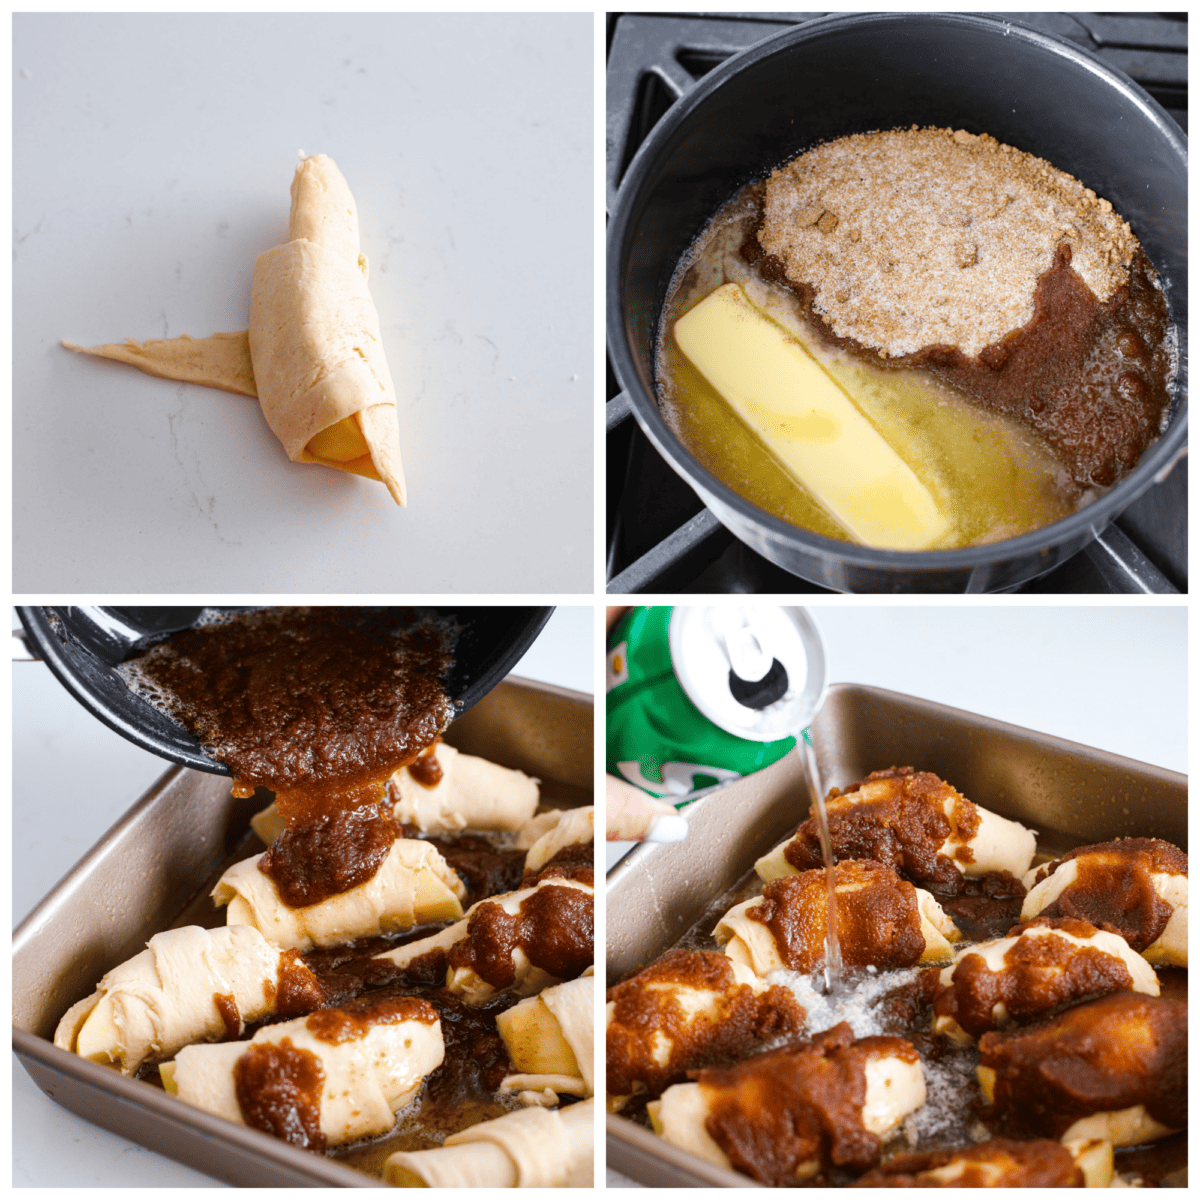 First photo of an apple slice wrapped in crescent roll dough. Second photo of the butter, sugar, and spices in a saucepan. Third photo of the sauce pouring over the dumplings. Fourth photo of the sprite being poured around the dumplings in the pan before it bakes.